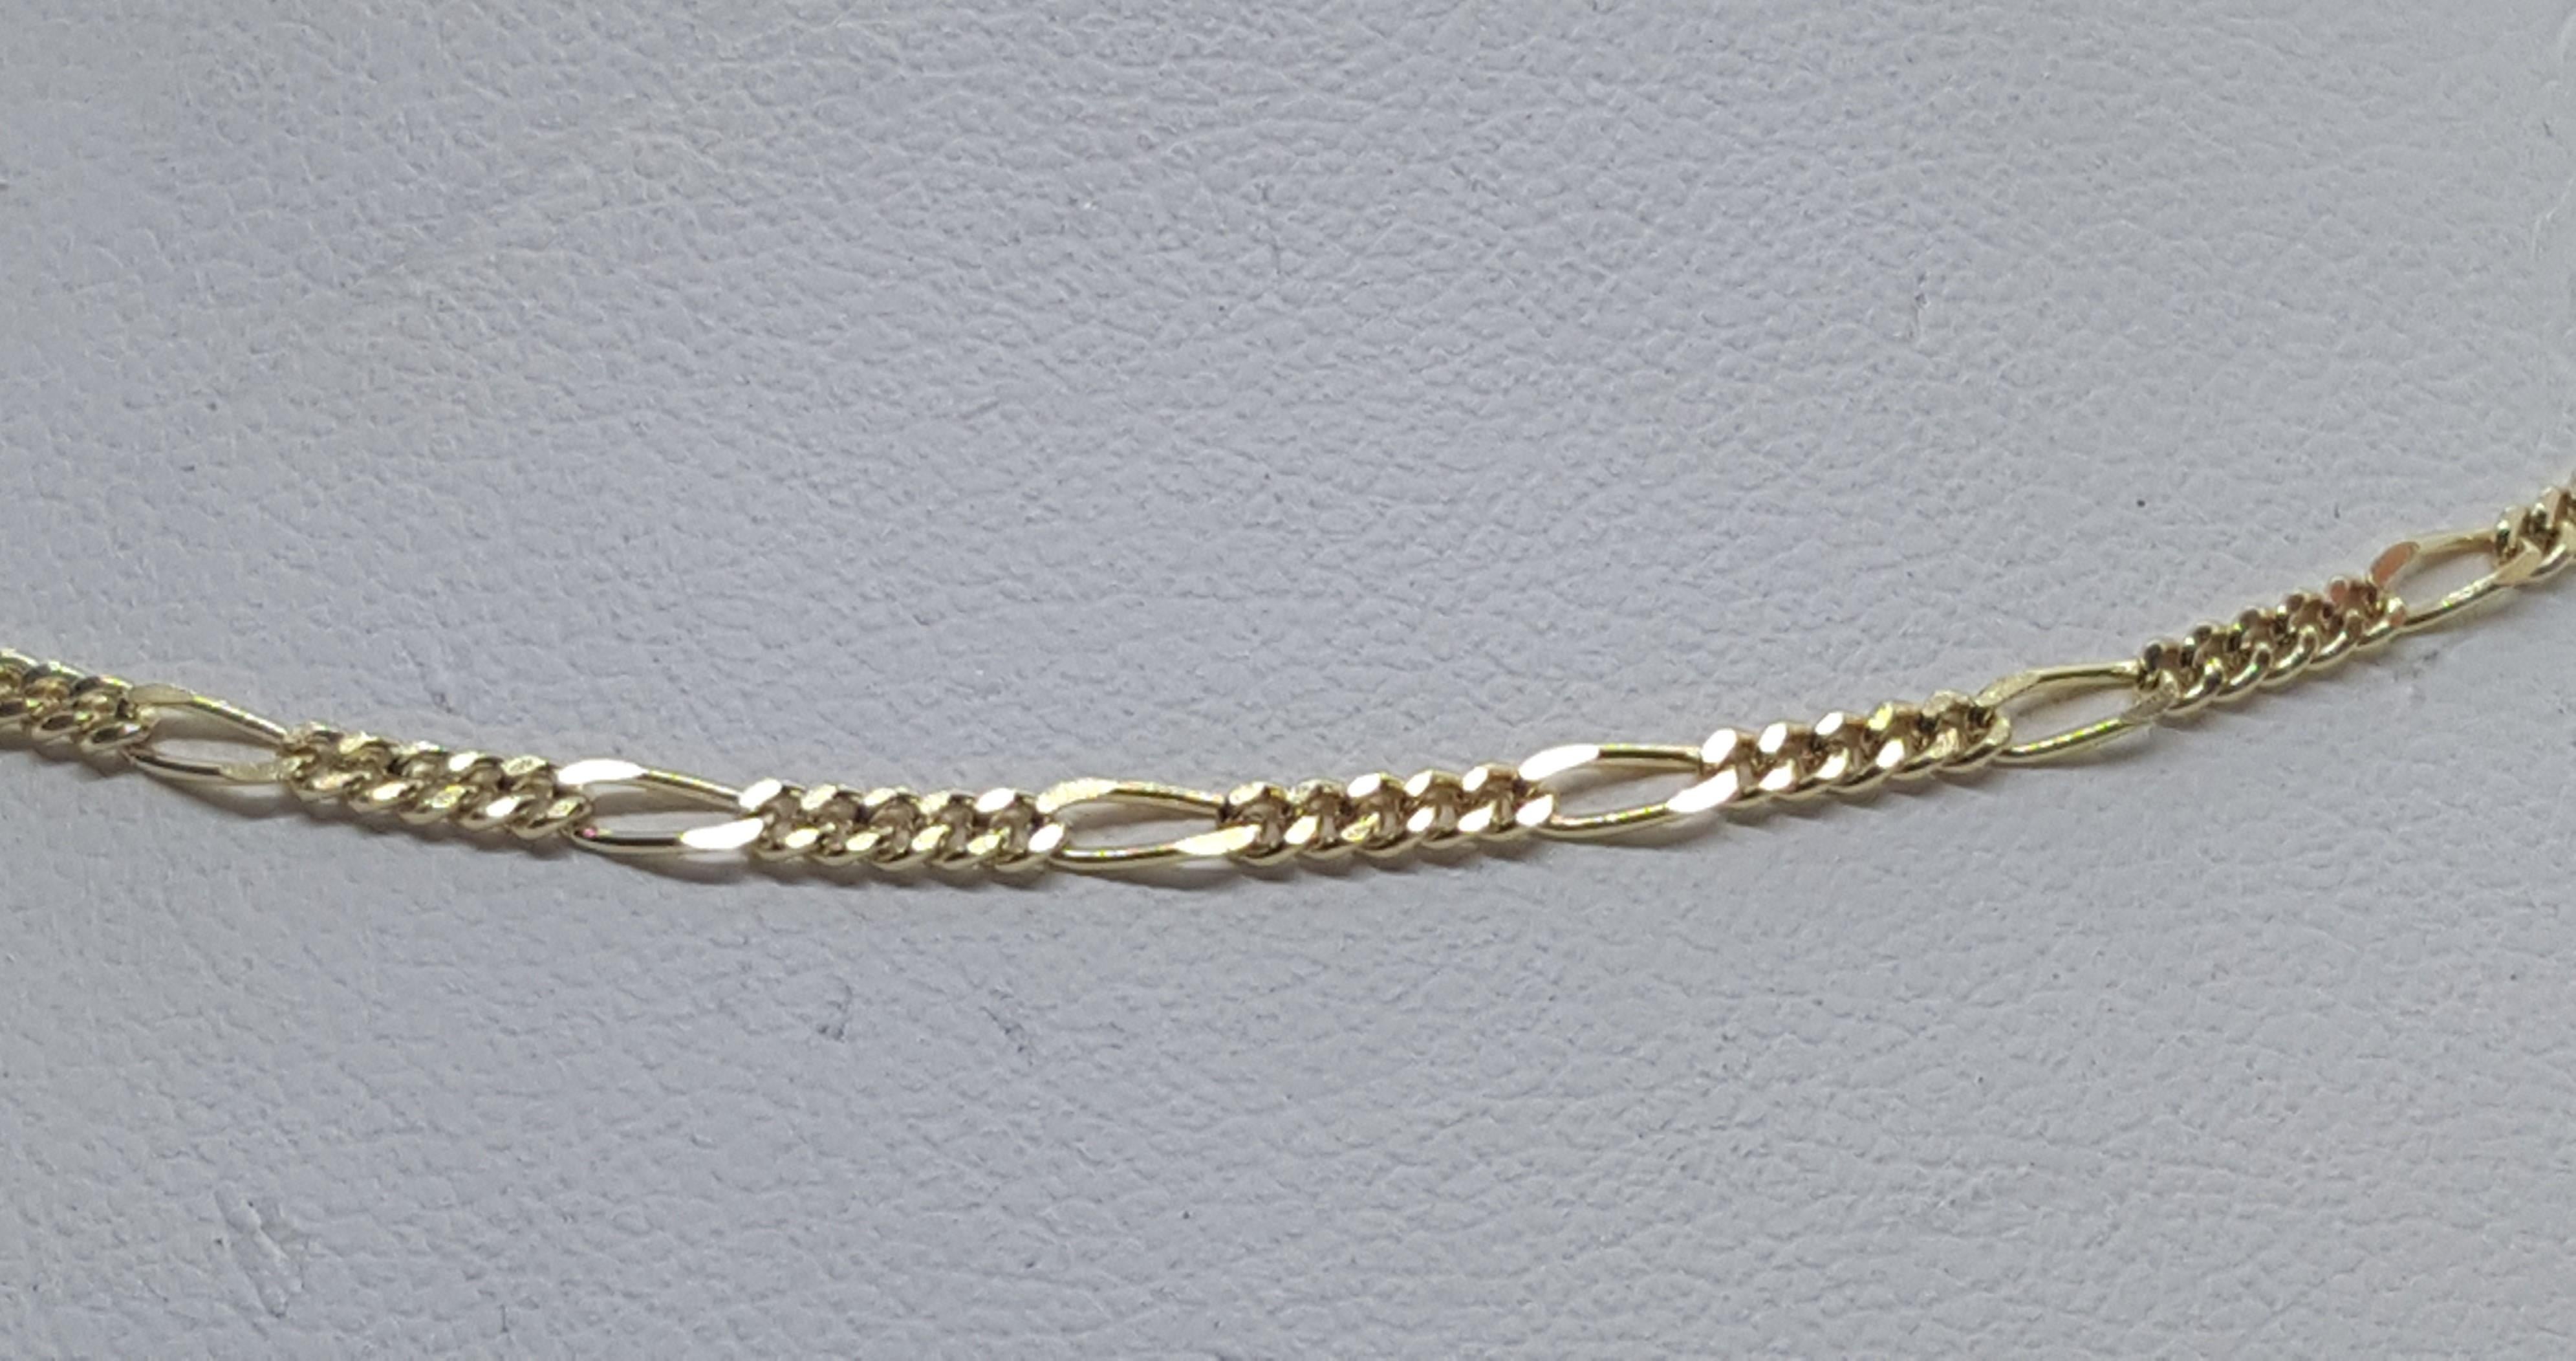 25-inch 18kt yellow gold Figaro chain that is 2mm wide, made in Italy, stamped Italy 750, 6.7 grams with a spring-ring clasp.  This chain is in very good condition. Please let us know if you have any questions. 

Rock N Gold Creations has been in